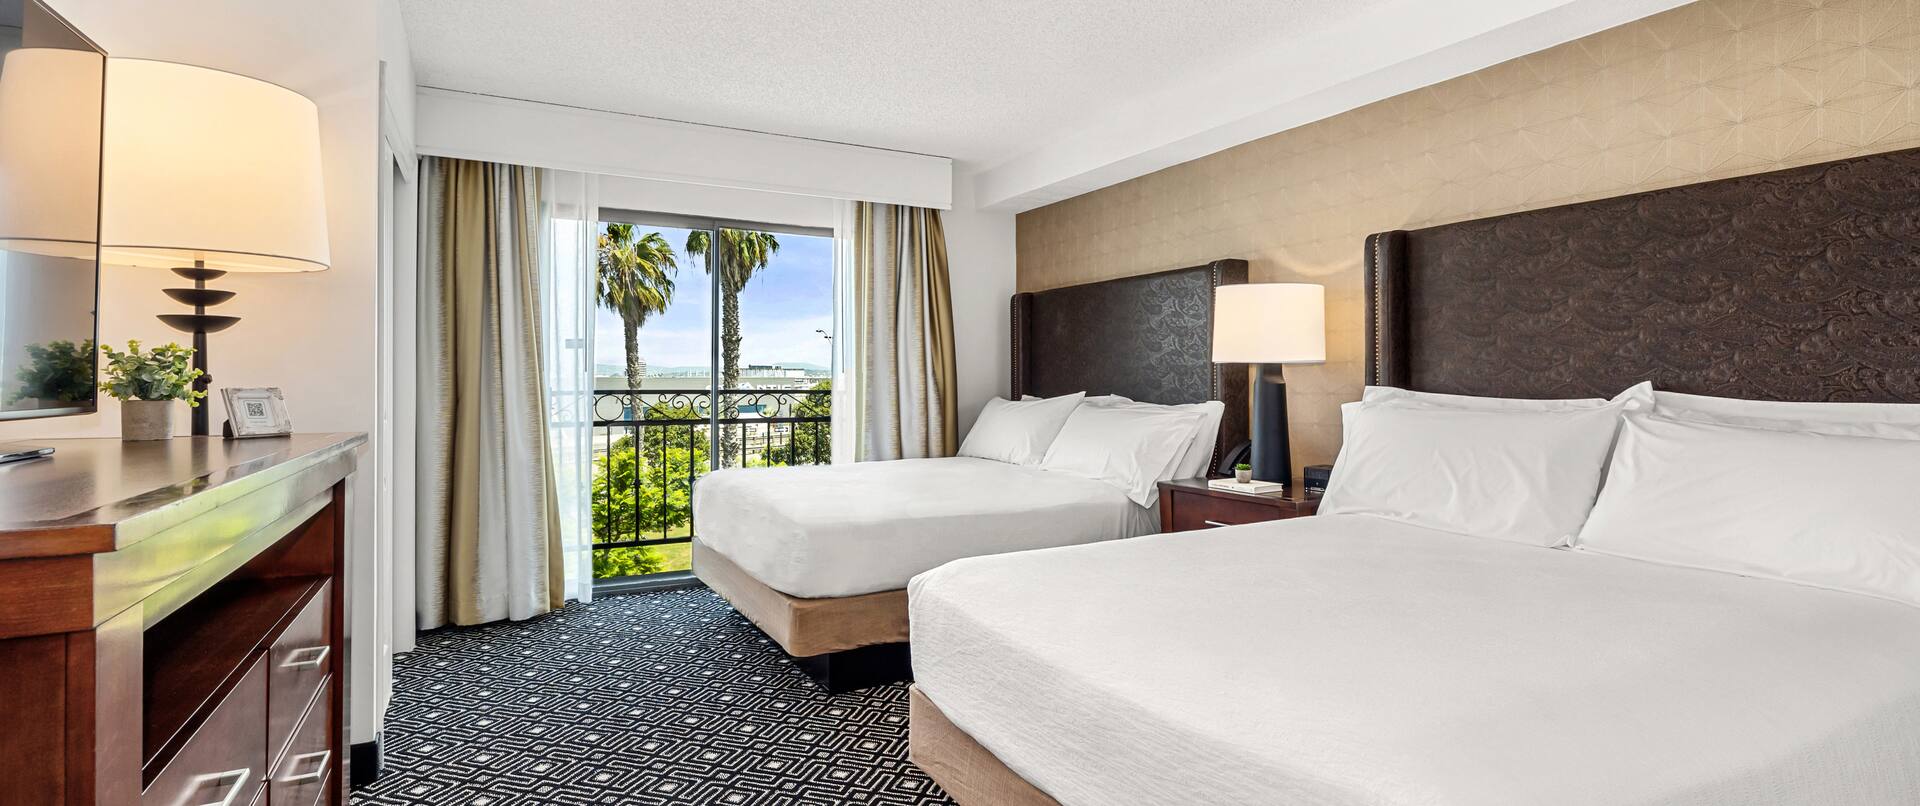 guest suite bedroom, 2 queen beds, window view of the palm trees